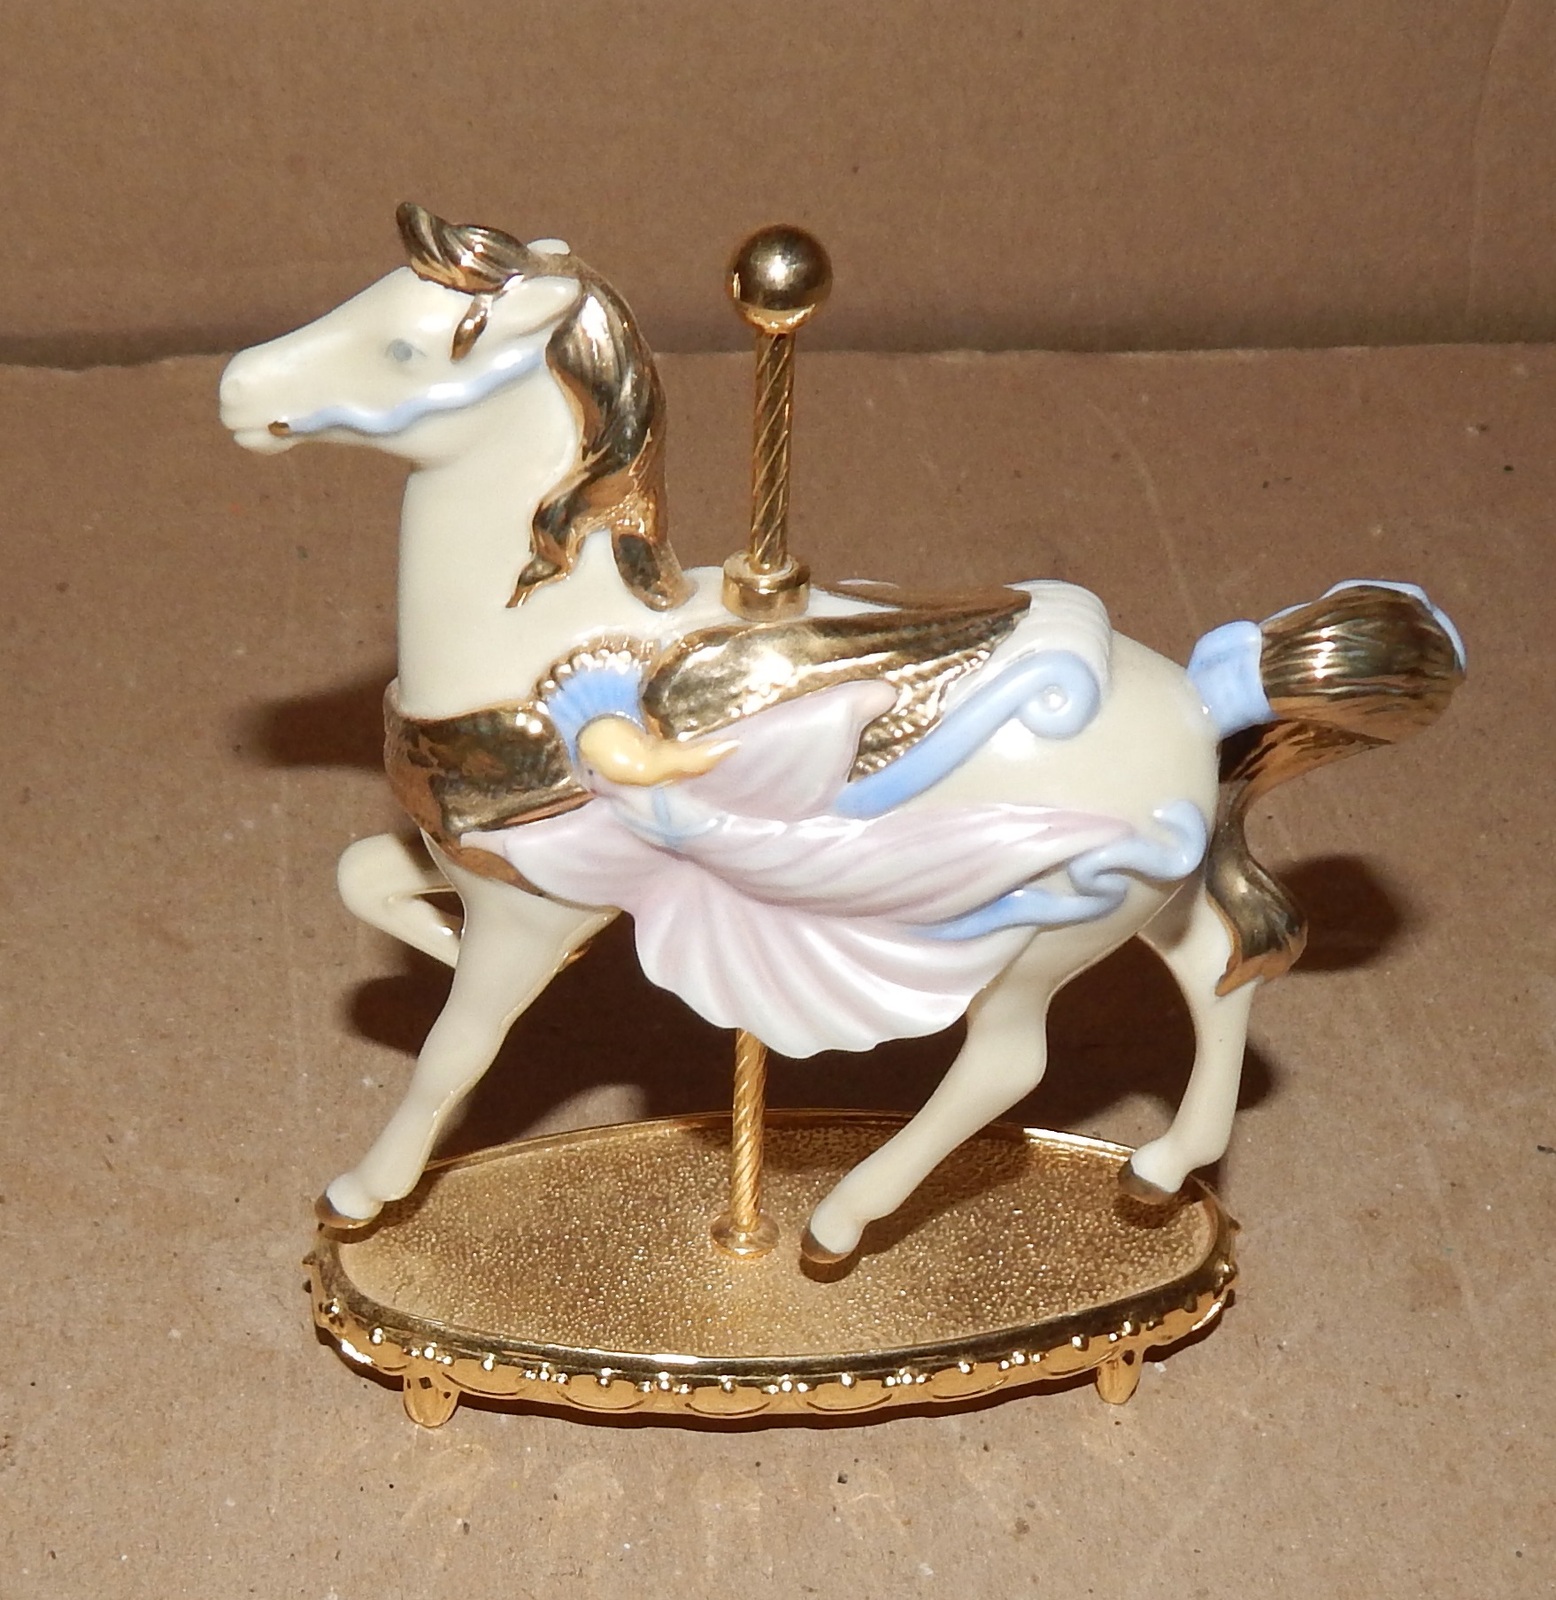 Franklin Mint Limited Carousel Horses Sculpture Collection YouChoose Type 186U-4 - $18.99